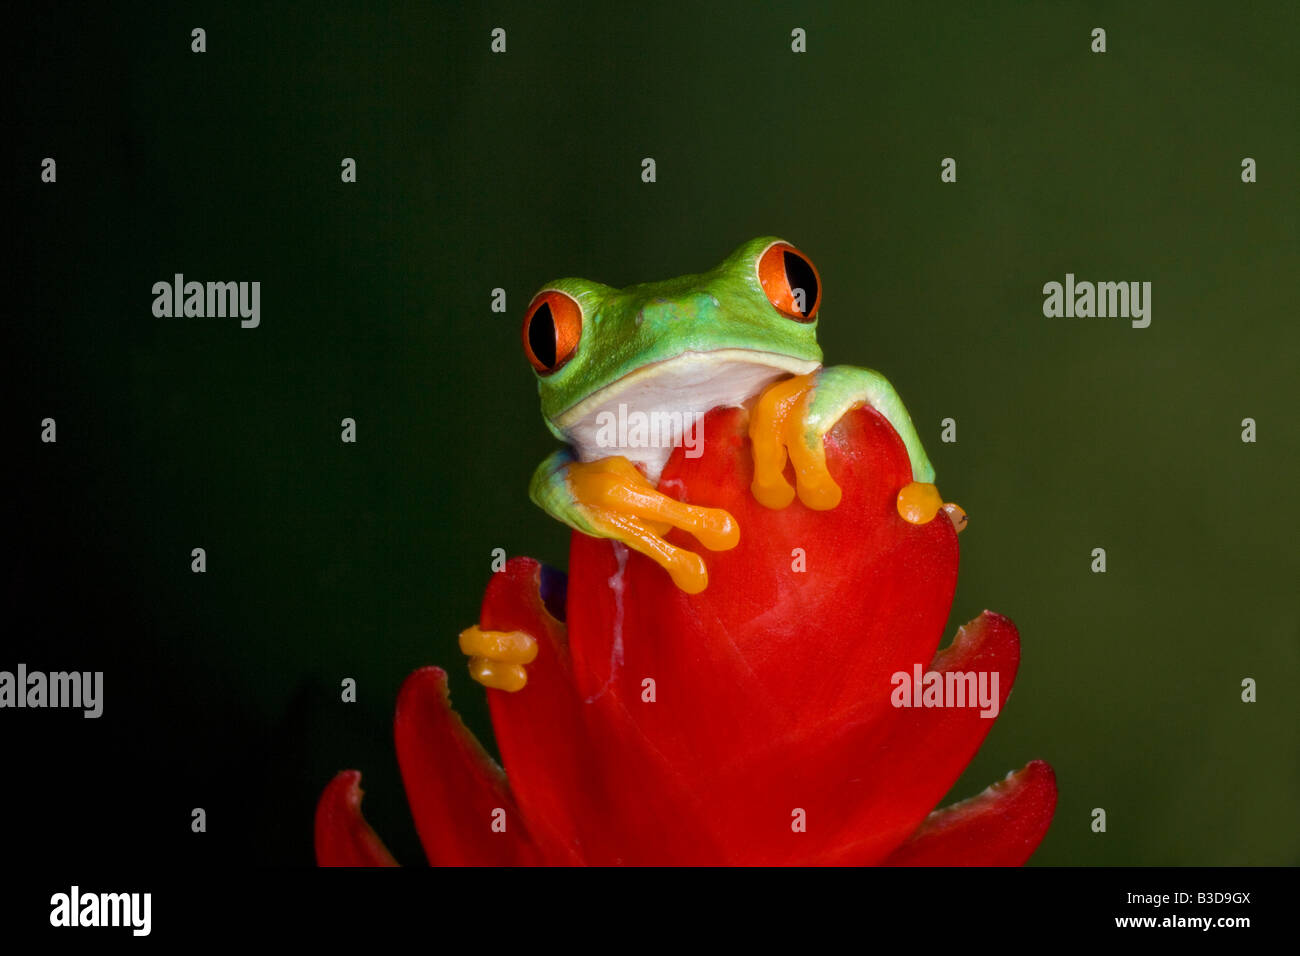 Red Eye tree frog, Costa Rica Banque D'Images